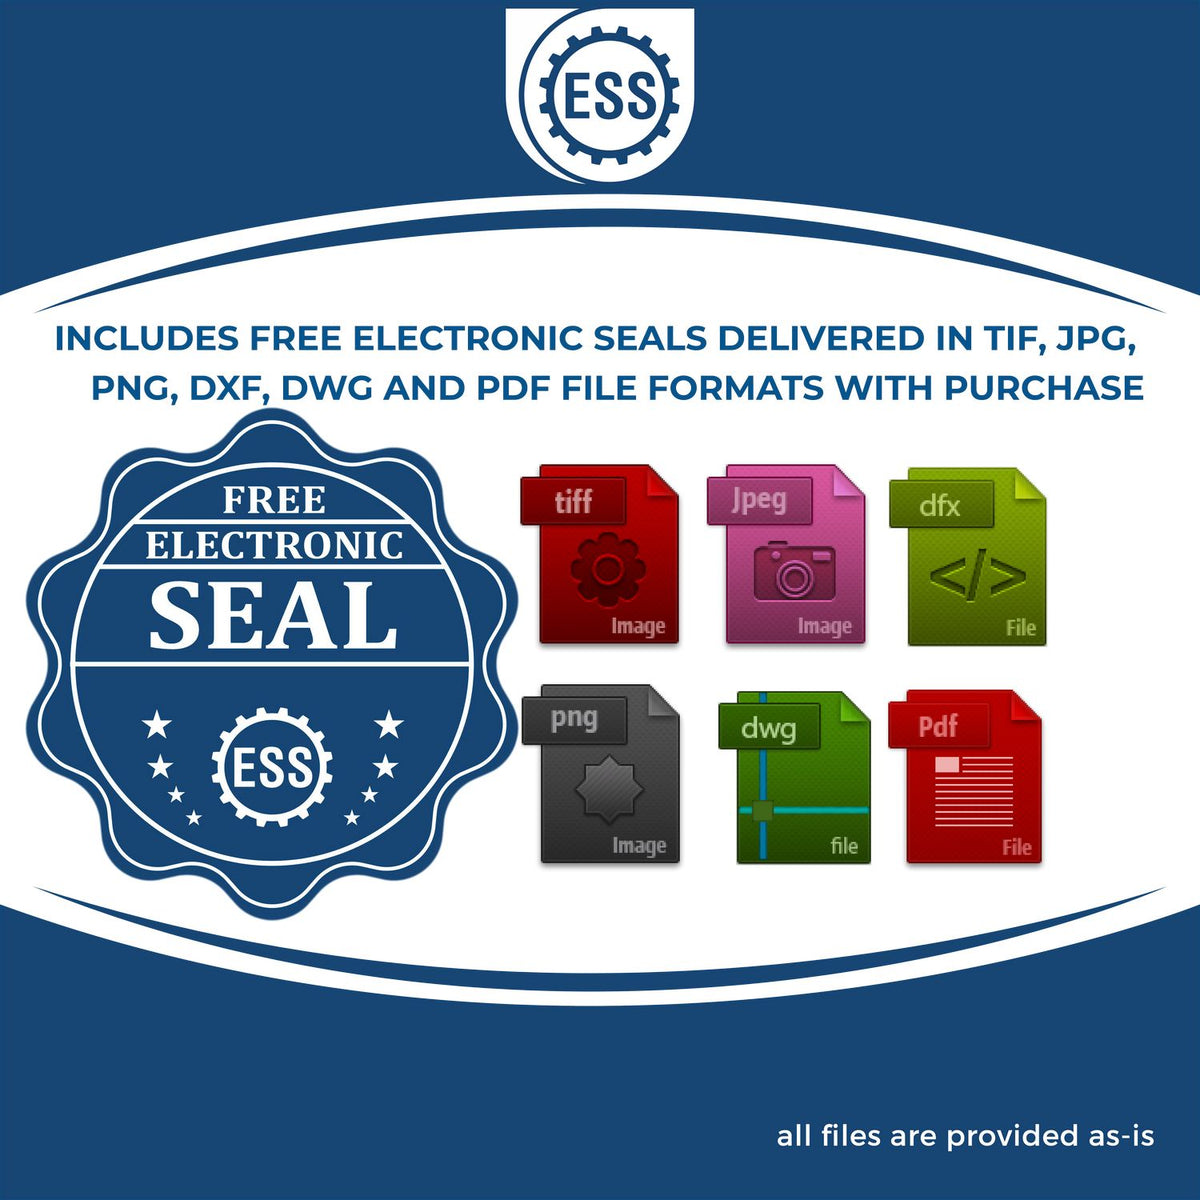 An infographic for the free electronic seal for the State of Florida Extended Long Reach Engineer Seal illustrating the different file type icons such as DXF, DWG, TIF, JPG and PNG.